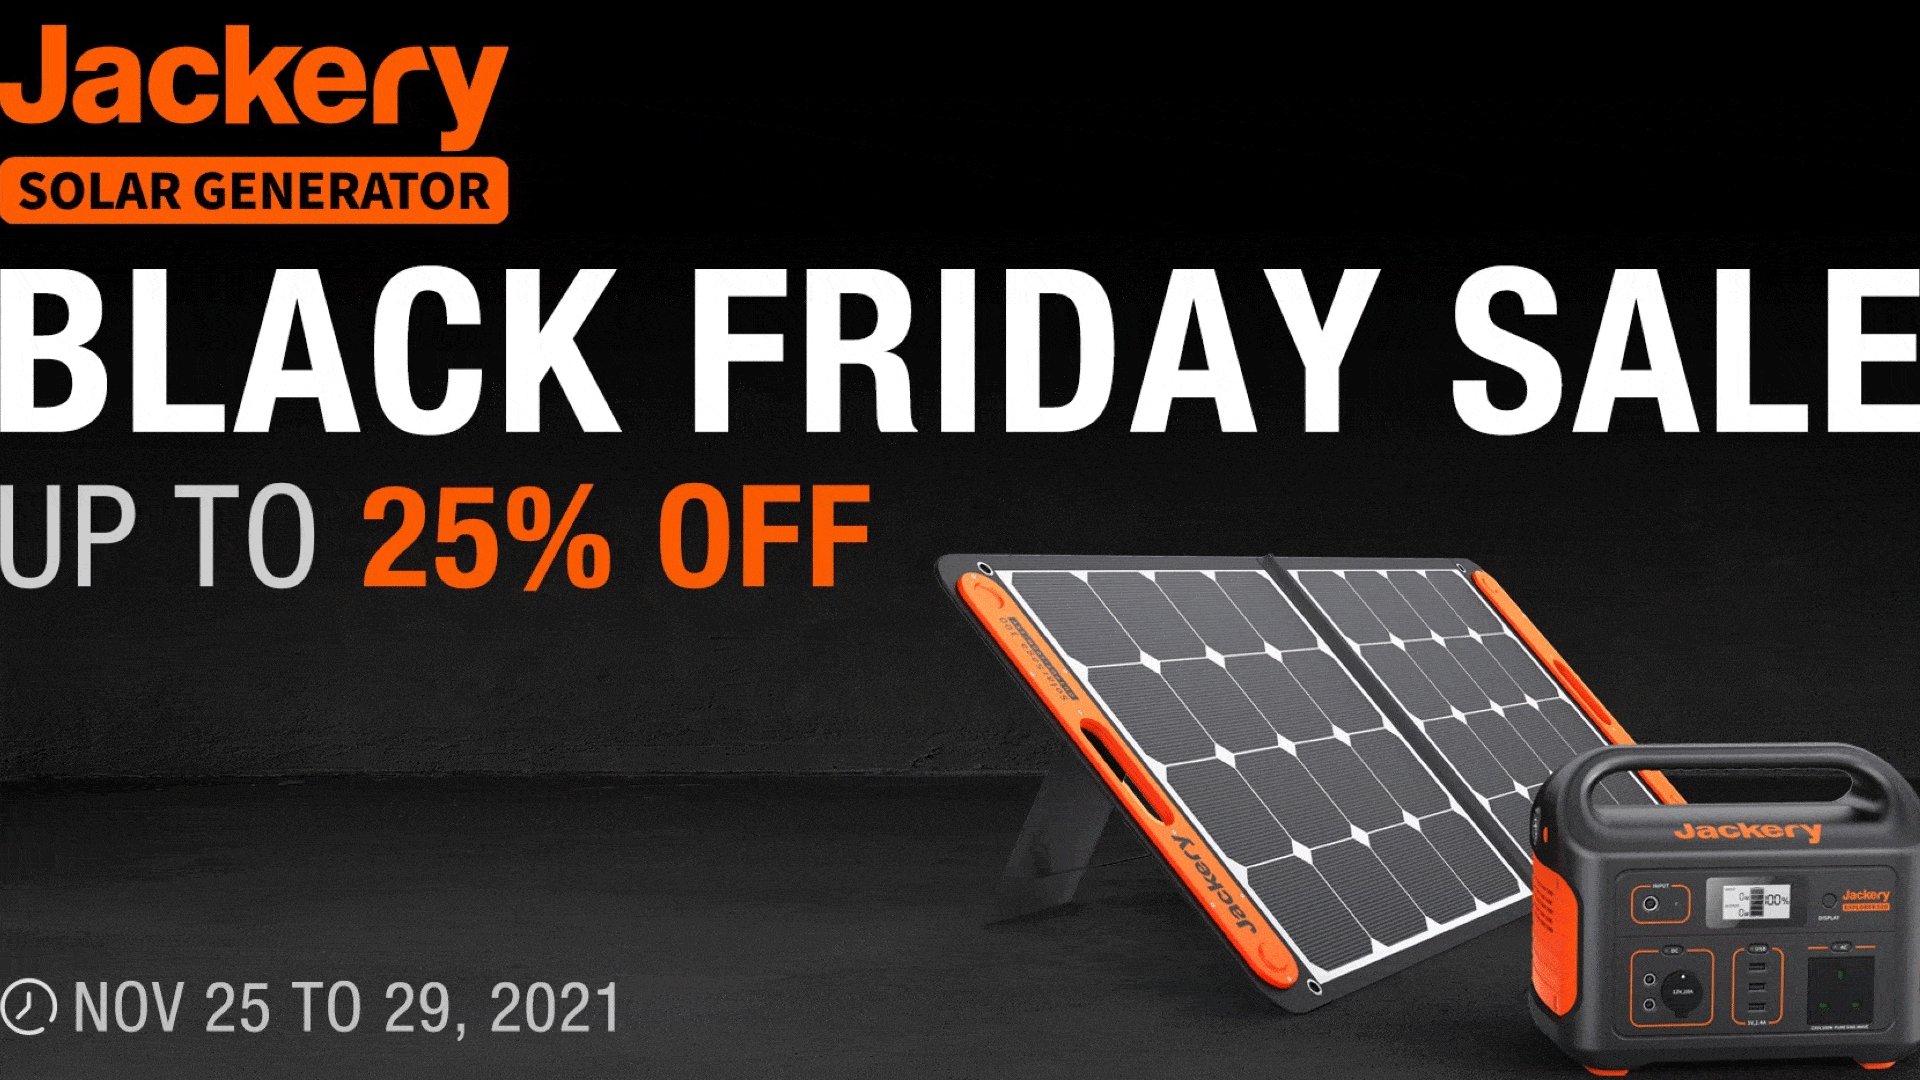 Portable Power Station Black Friday Deals – Jackery, Ecoflow and More